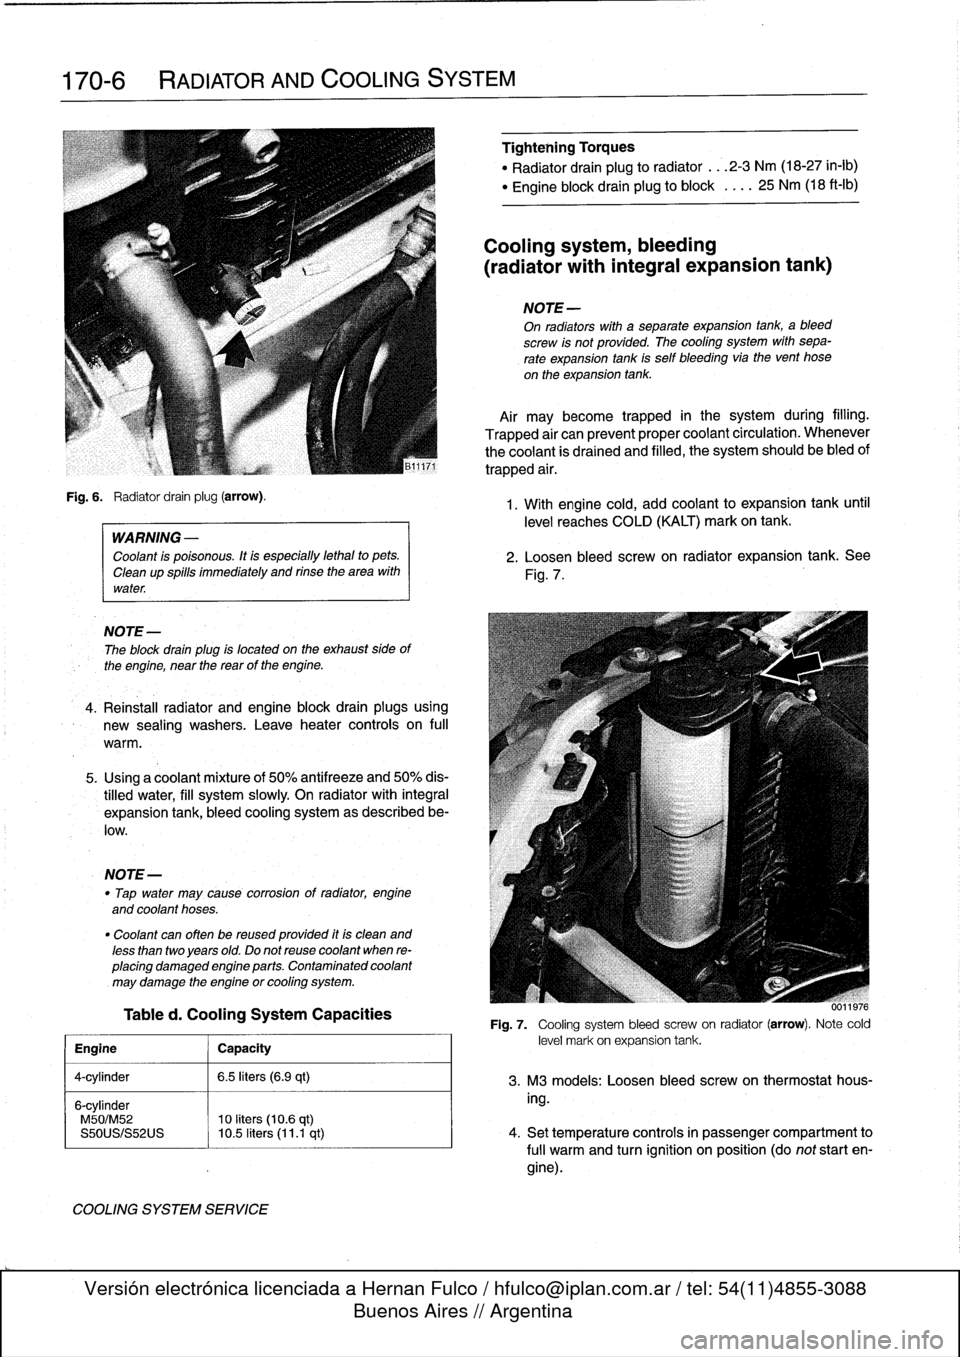 BMW M3 1996 E36 Workshop Manual 
170-6

	

RADIATOR
AND
COOLING
SYSTEM

Fig
.
6
.

	

Radiator
drain
plug
(arrow)
.

WARNING
-

Coolant
is
poisonous
.
Itis
especially
lethal
to
pets
.

Cleanup
spills
immediately
and
rinse
the
area
w